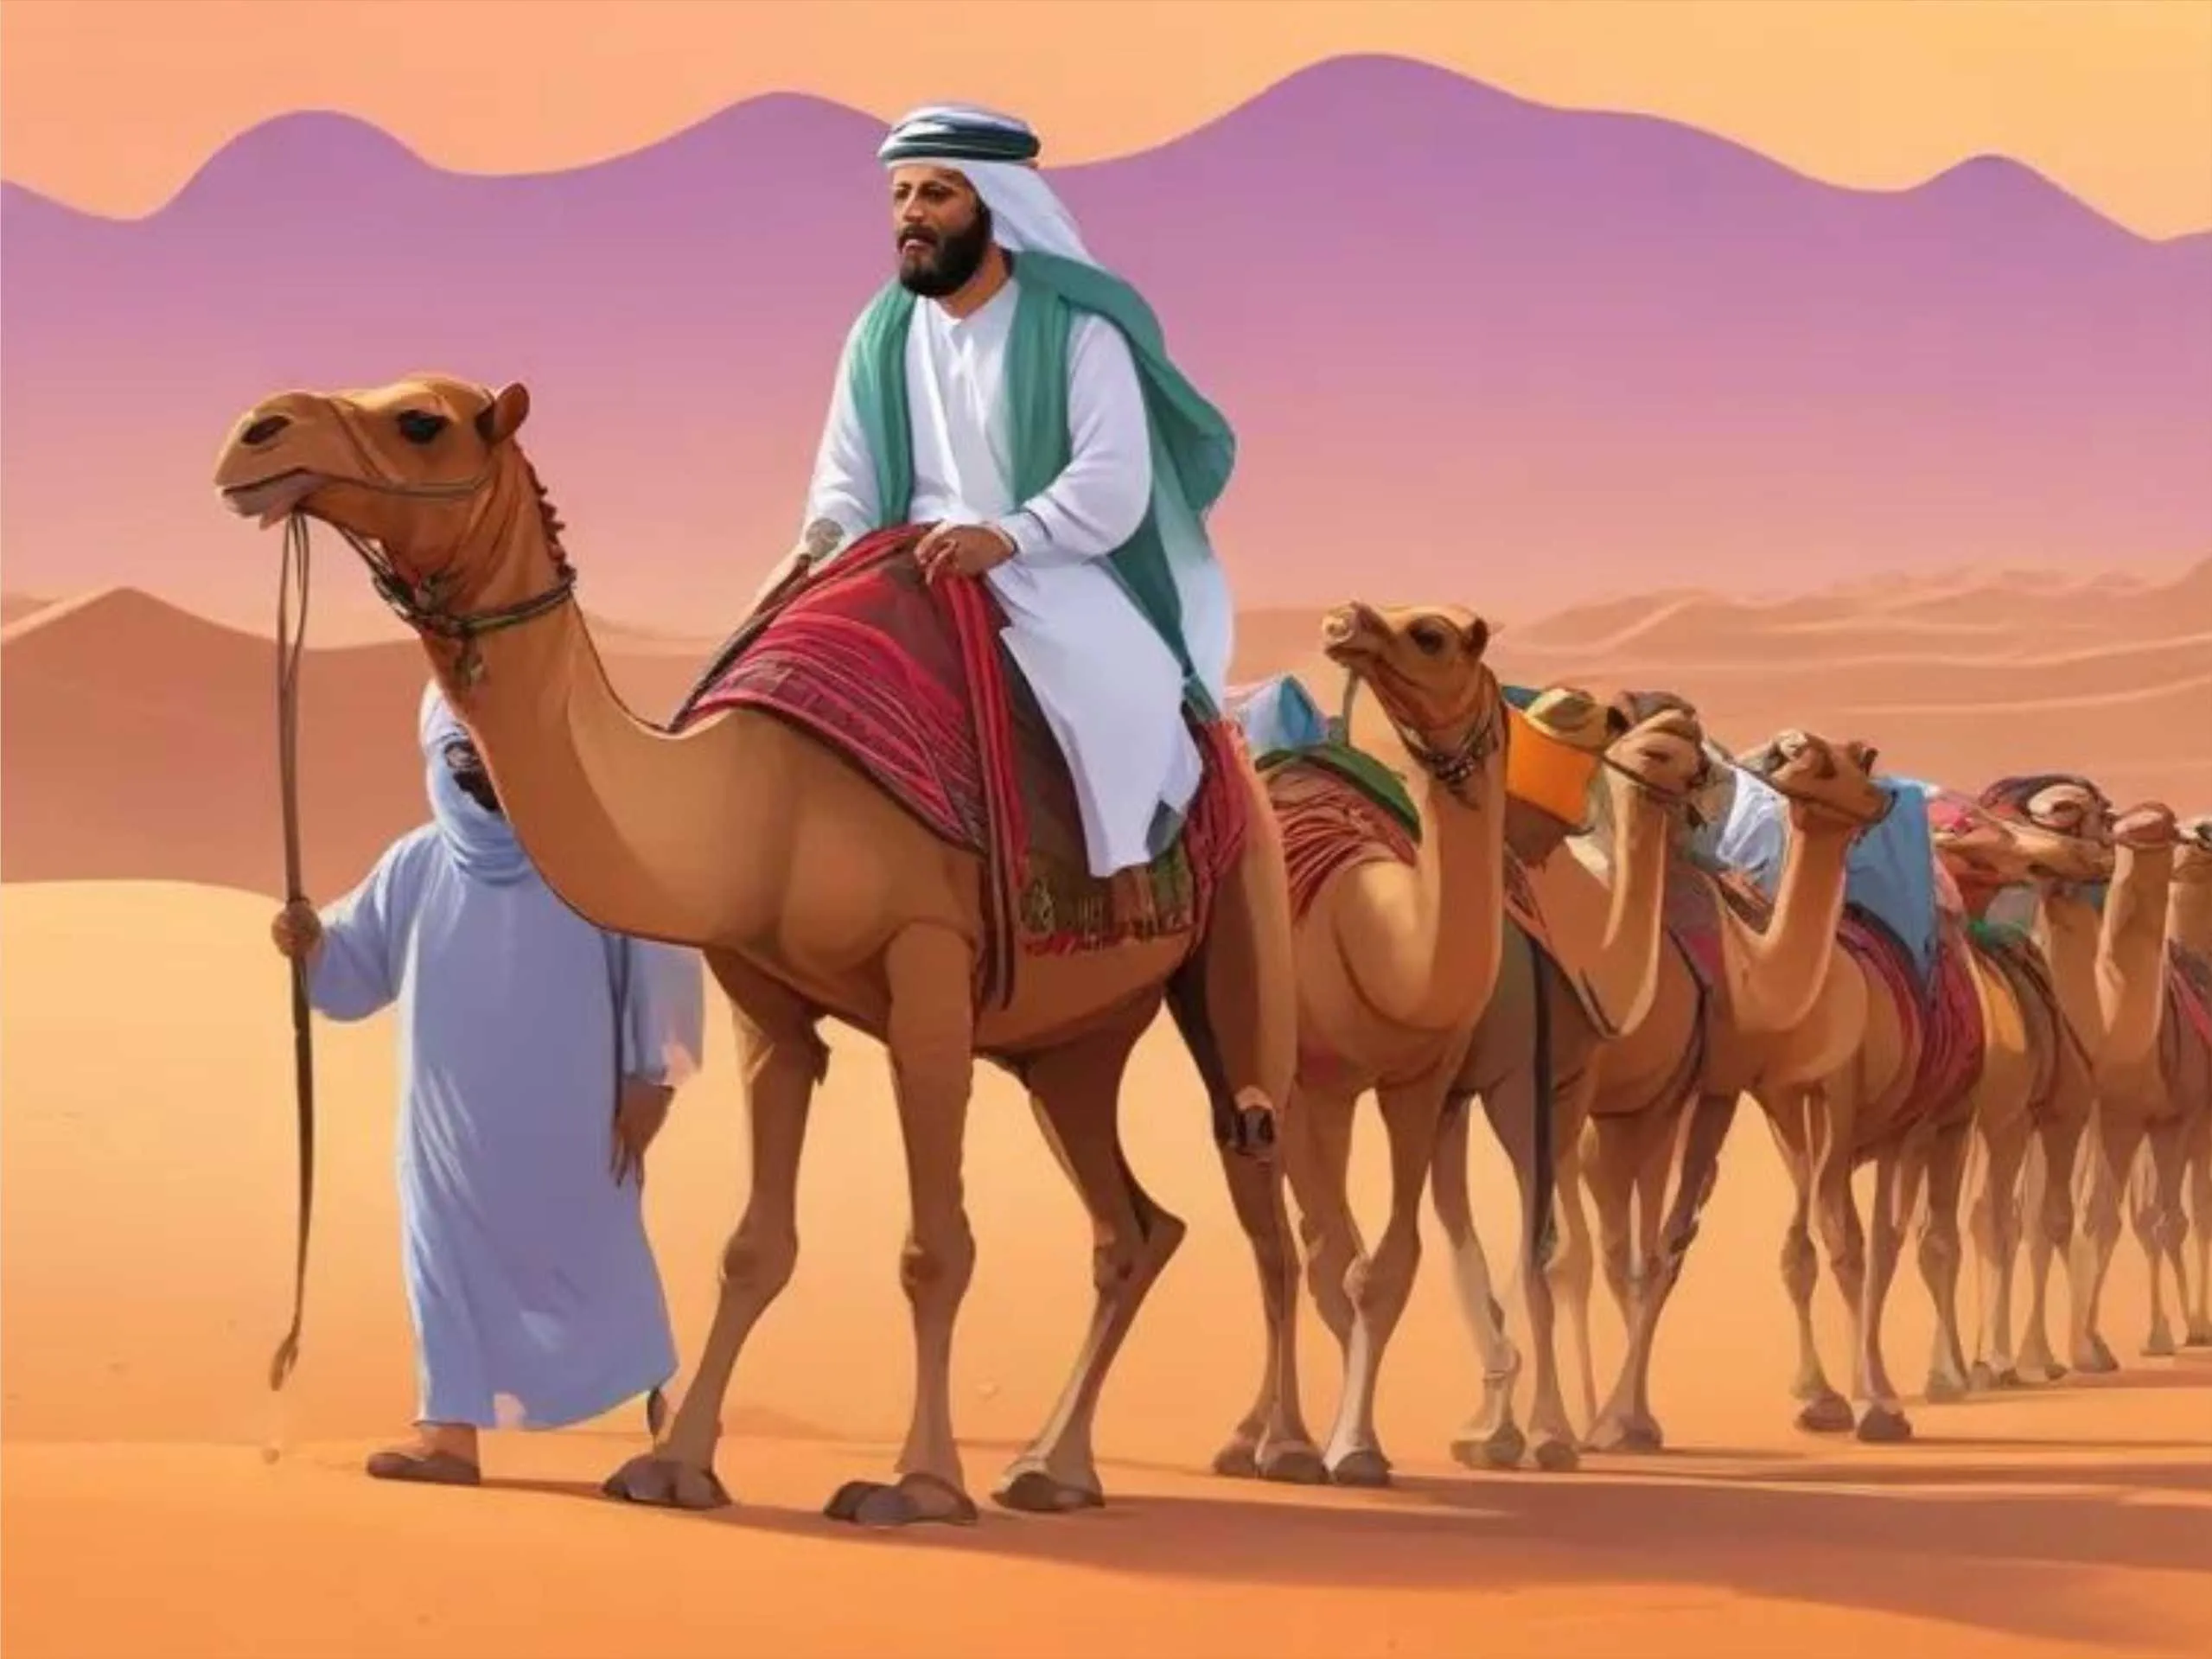 cartoon image of a sheikh travelling on camel in desert